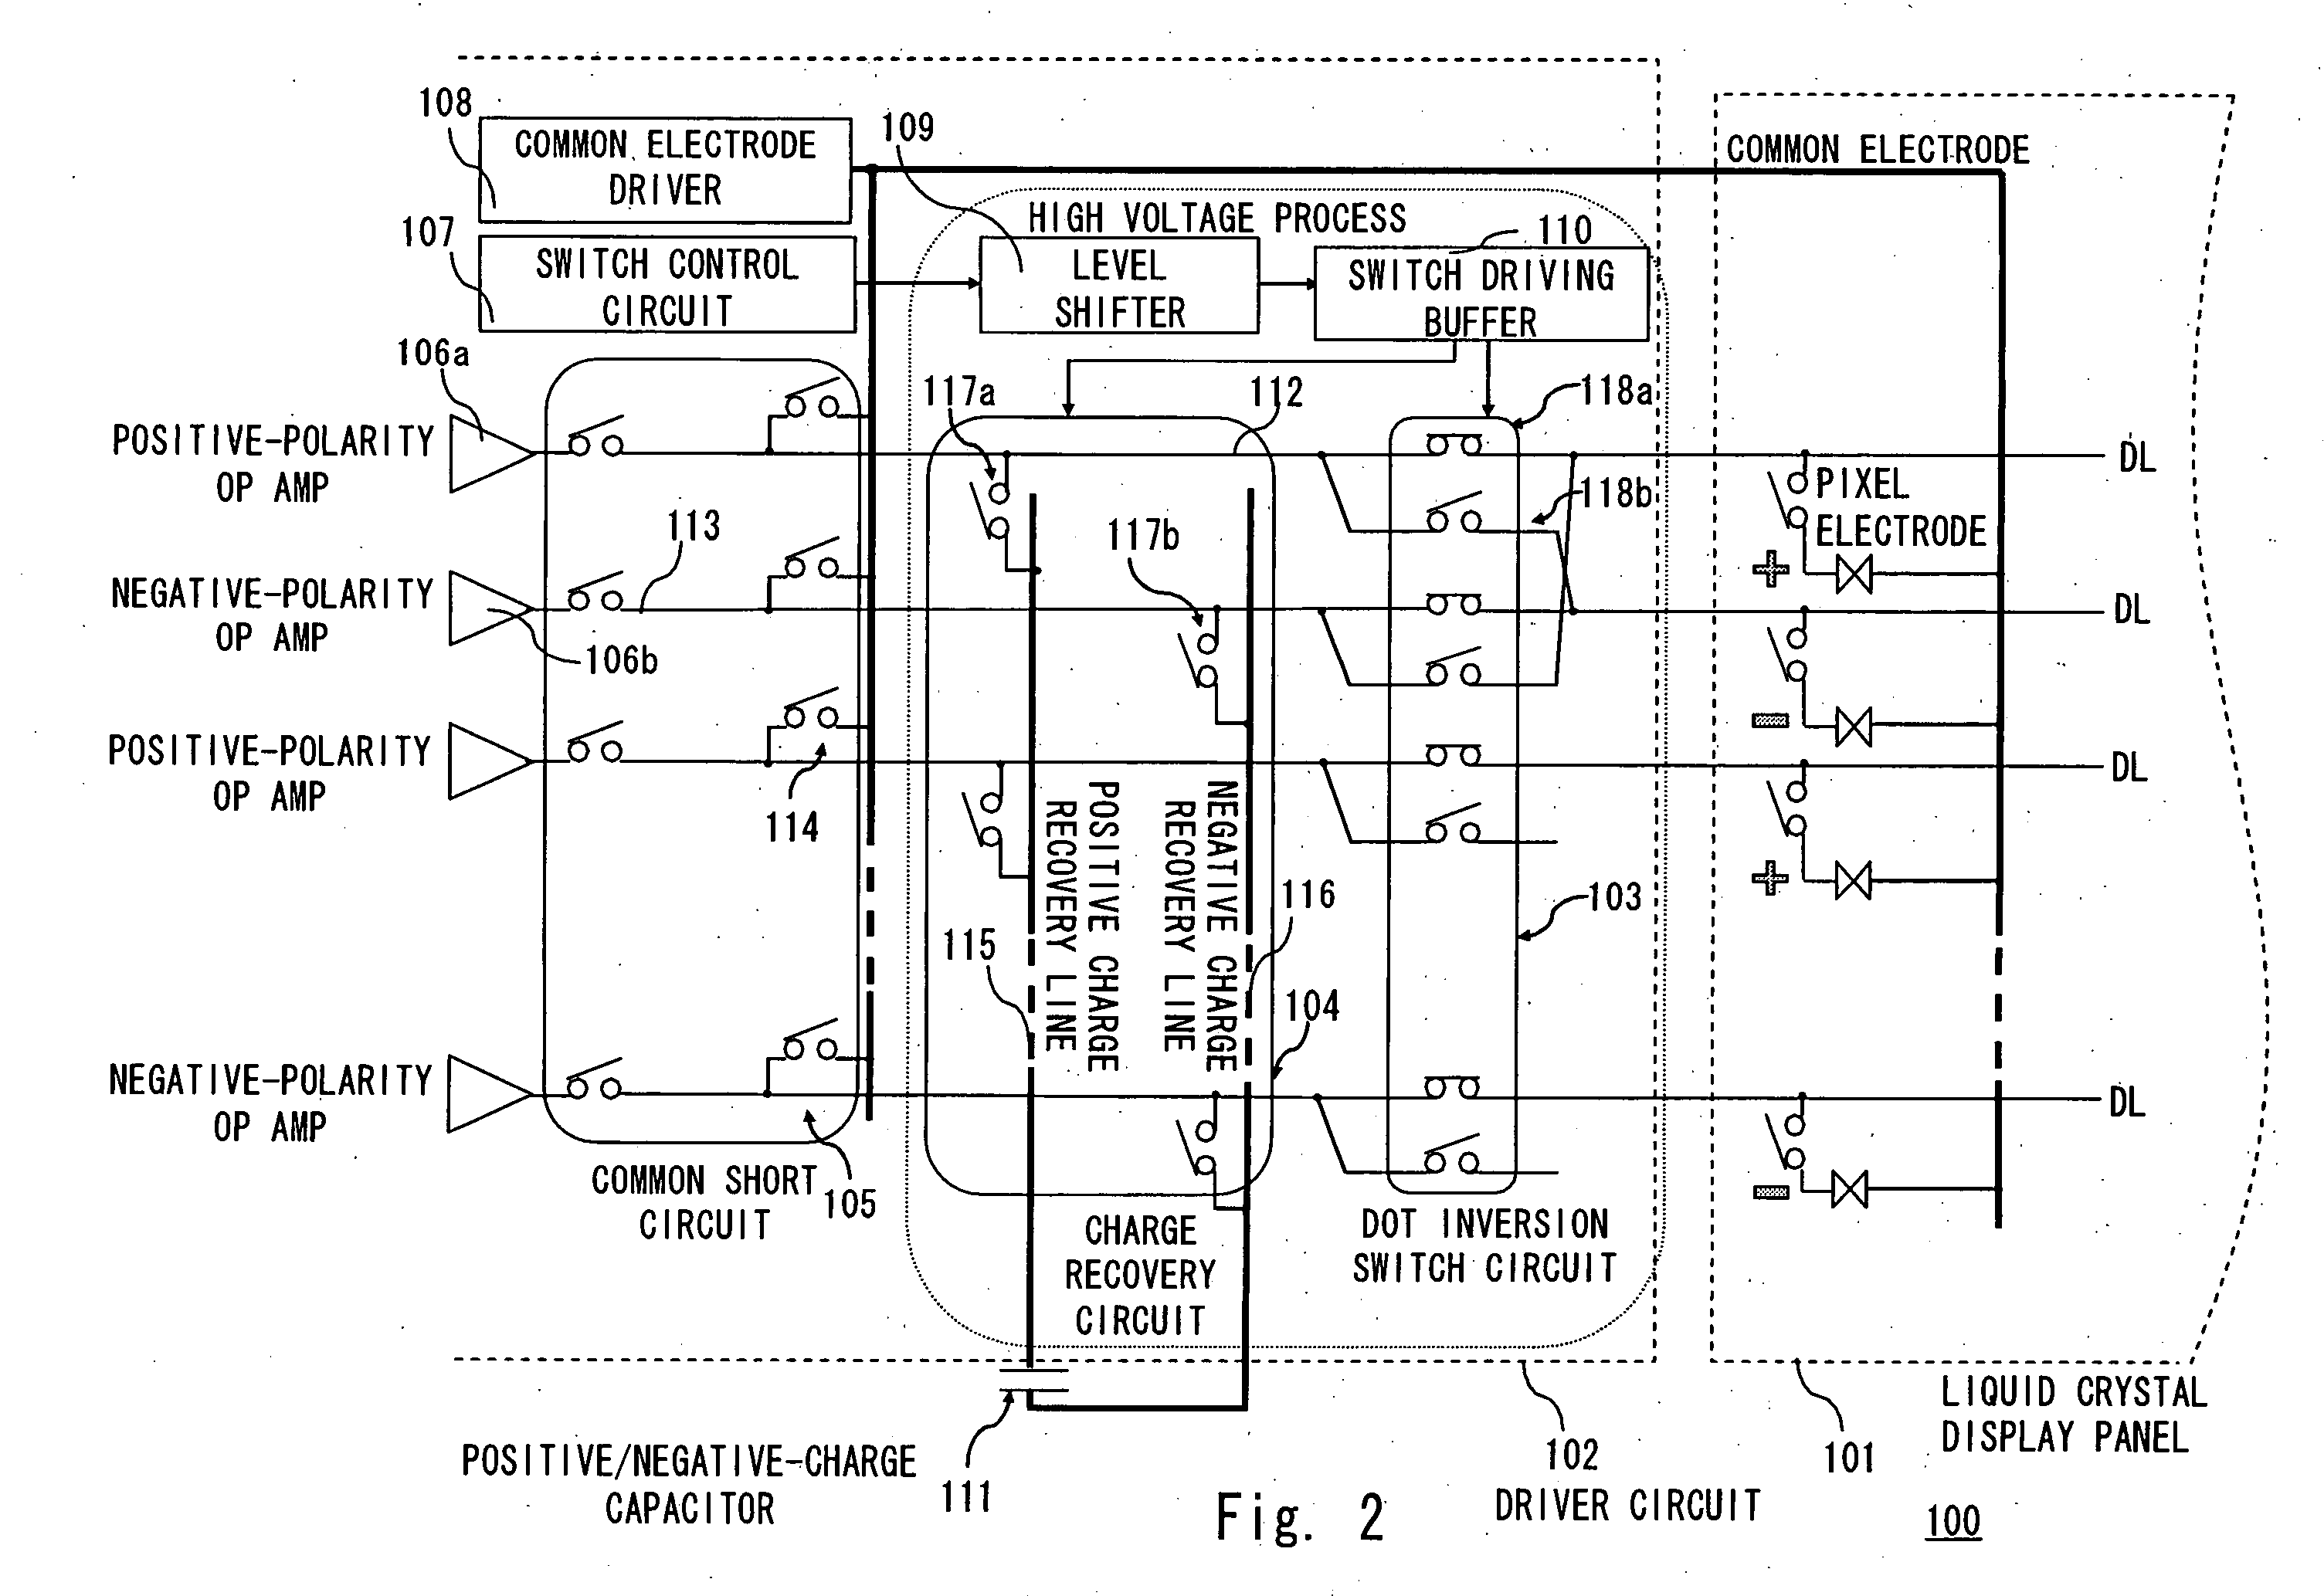 Driver circuit and display device